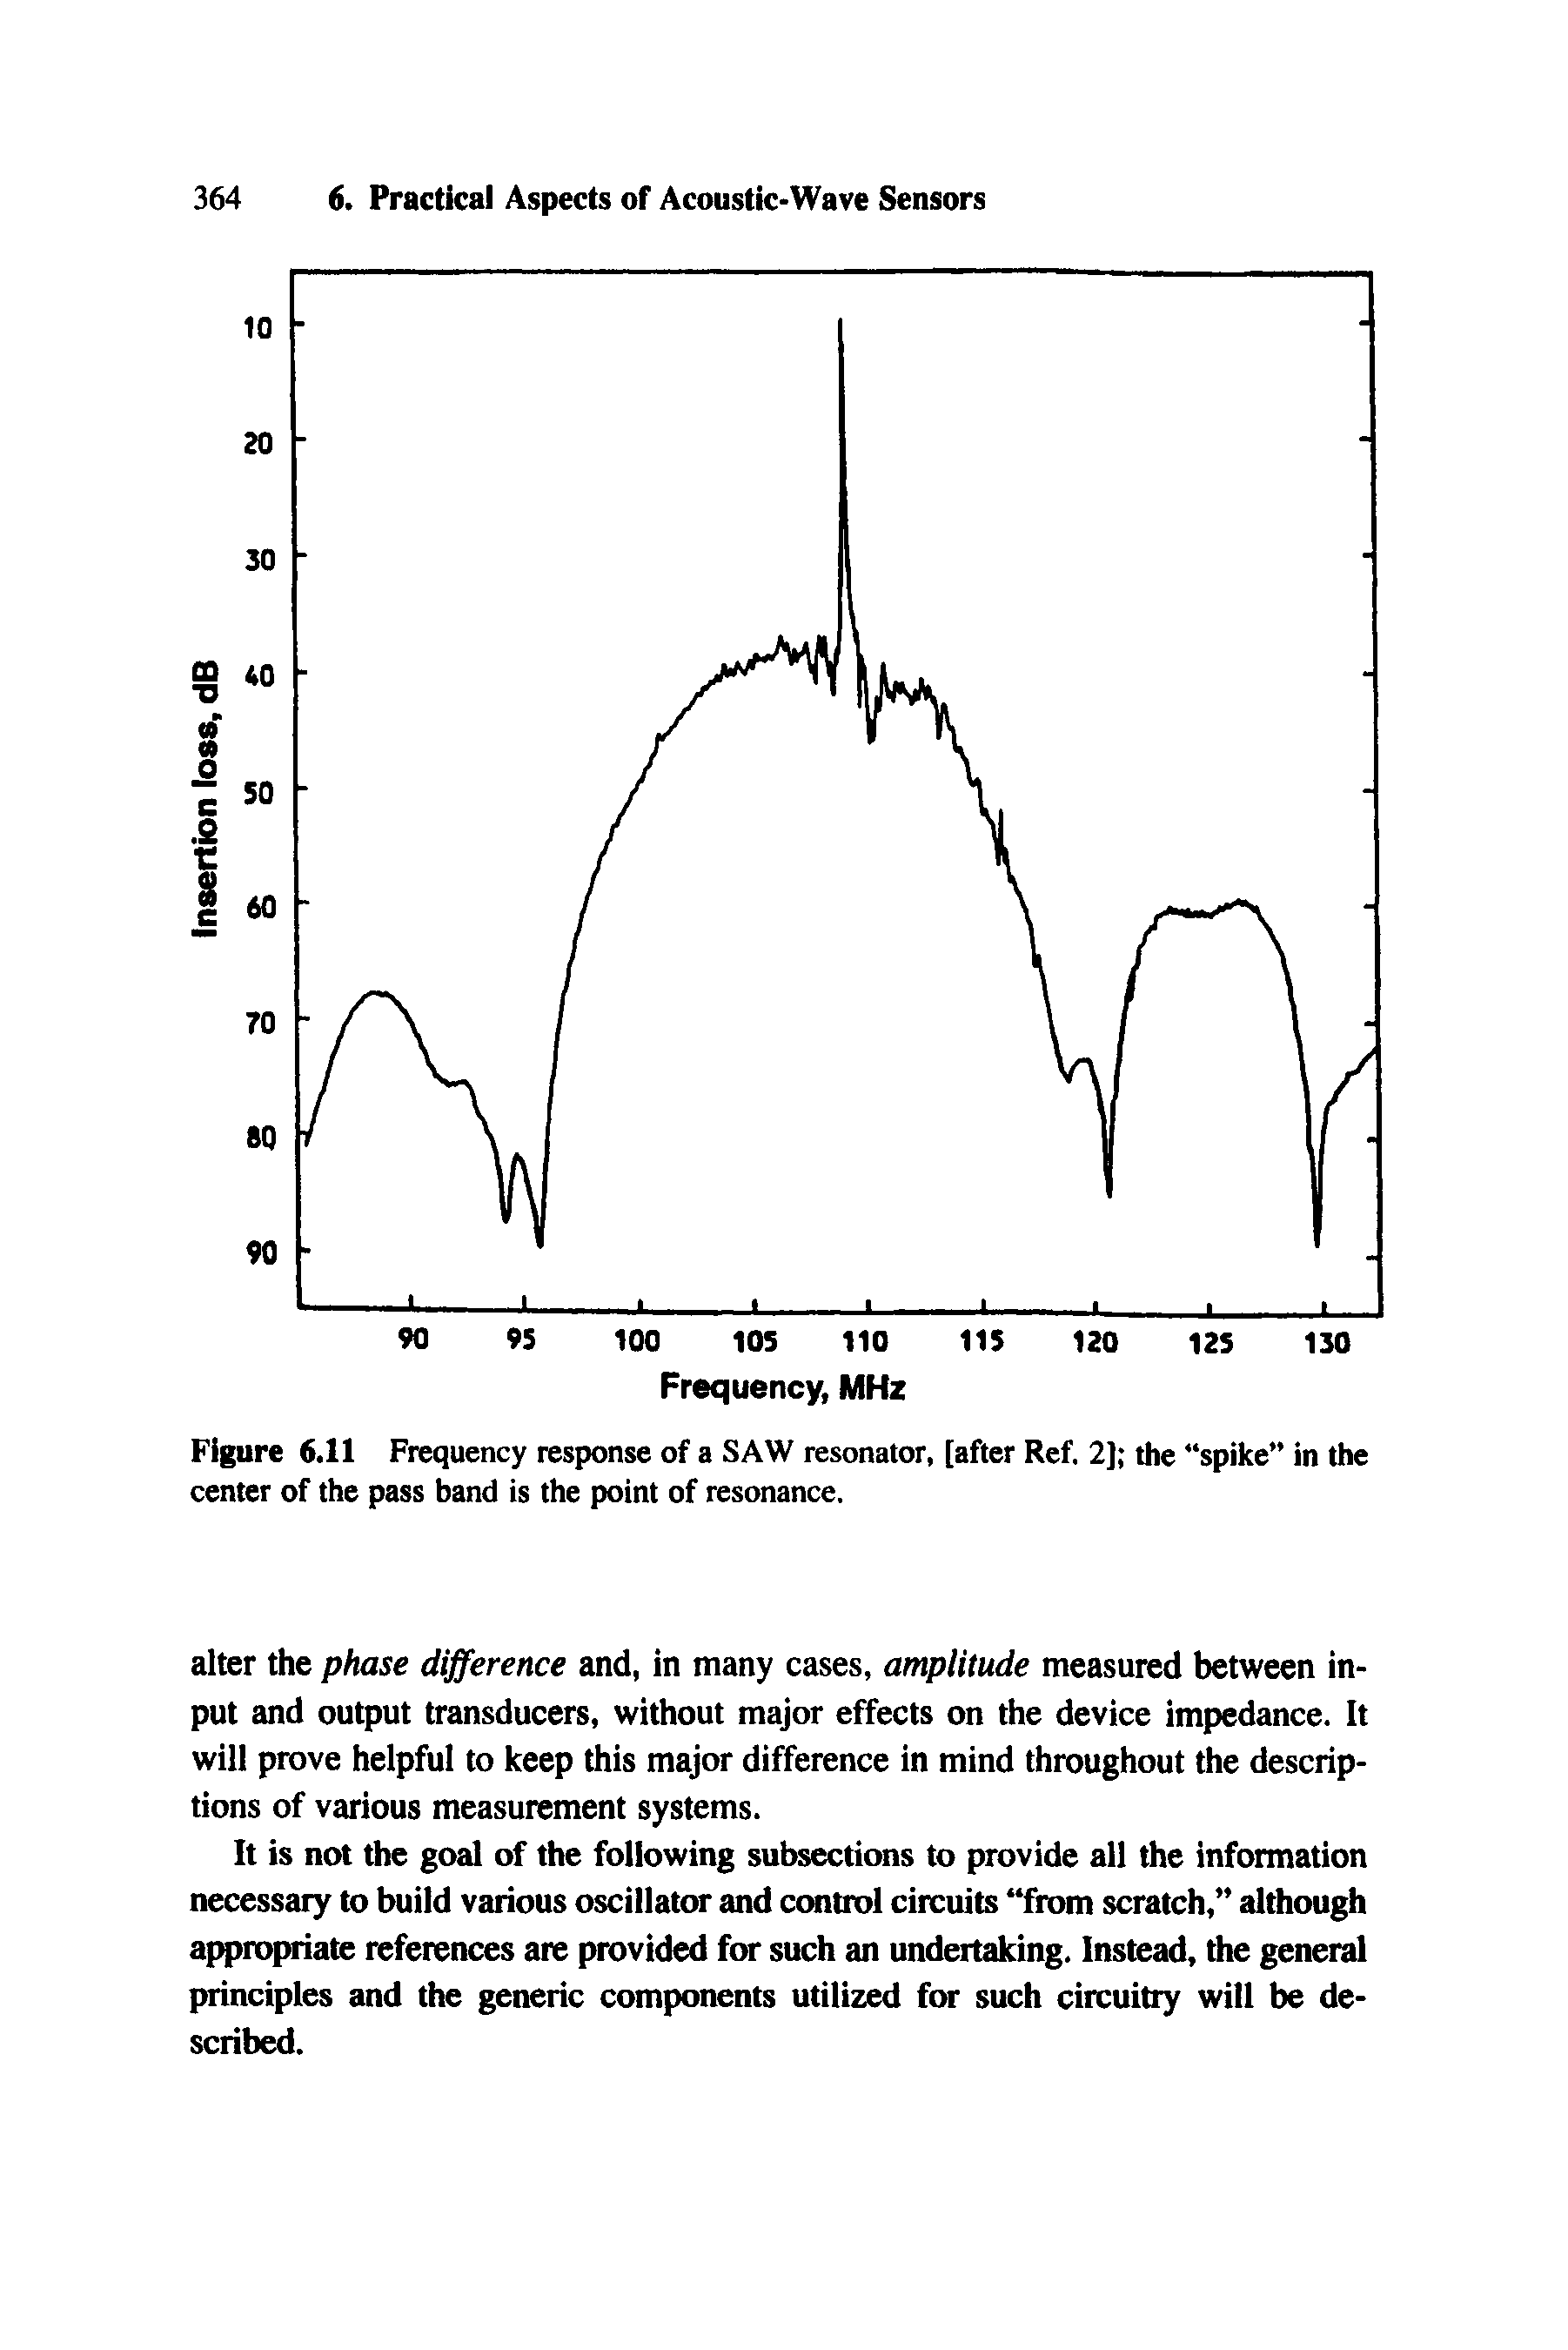 Figure 6.11 Frequency response of a SAW resonator, [after Ref. 2] the spike in the center of the pass band is the point of resonance.